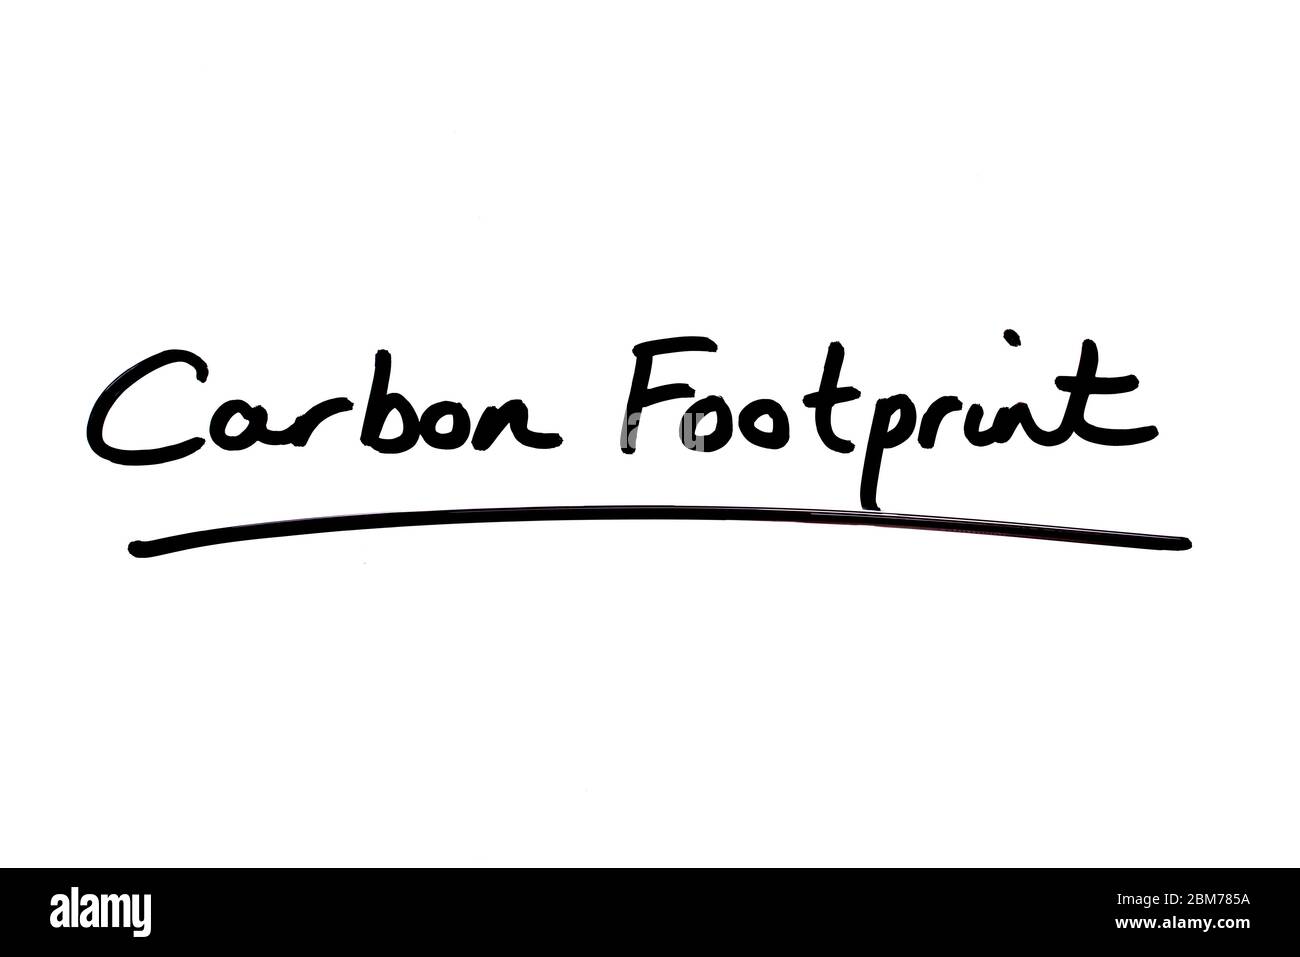 Carbon Footprint handwritten on a white background. Stock Photo